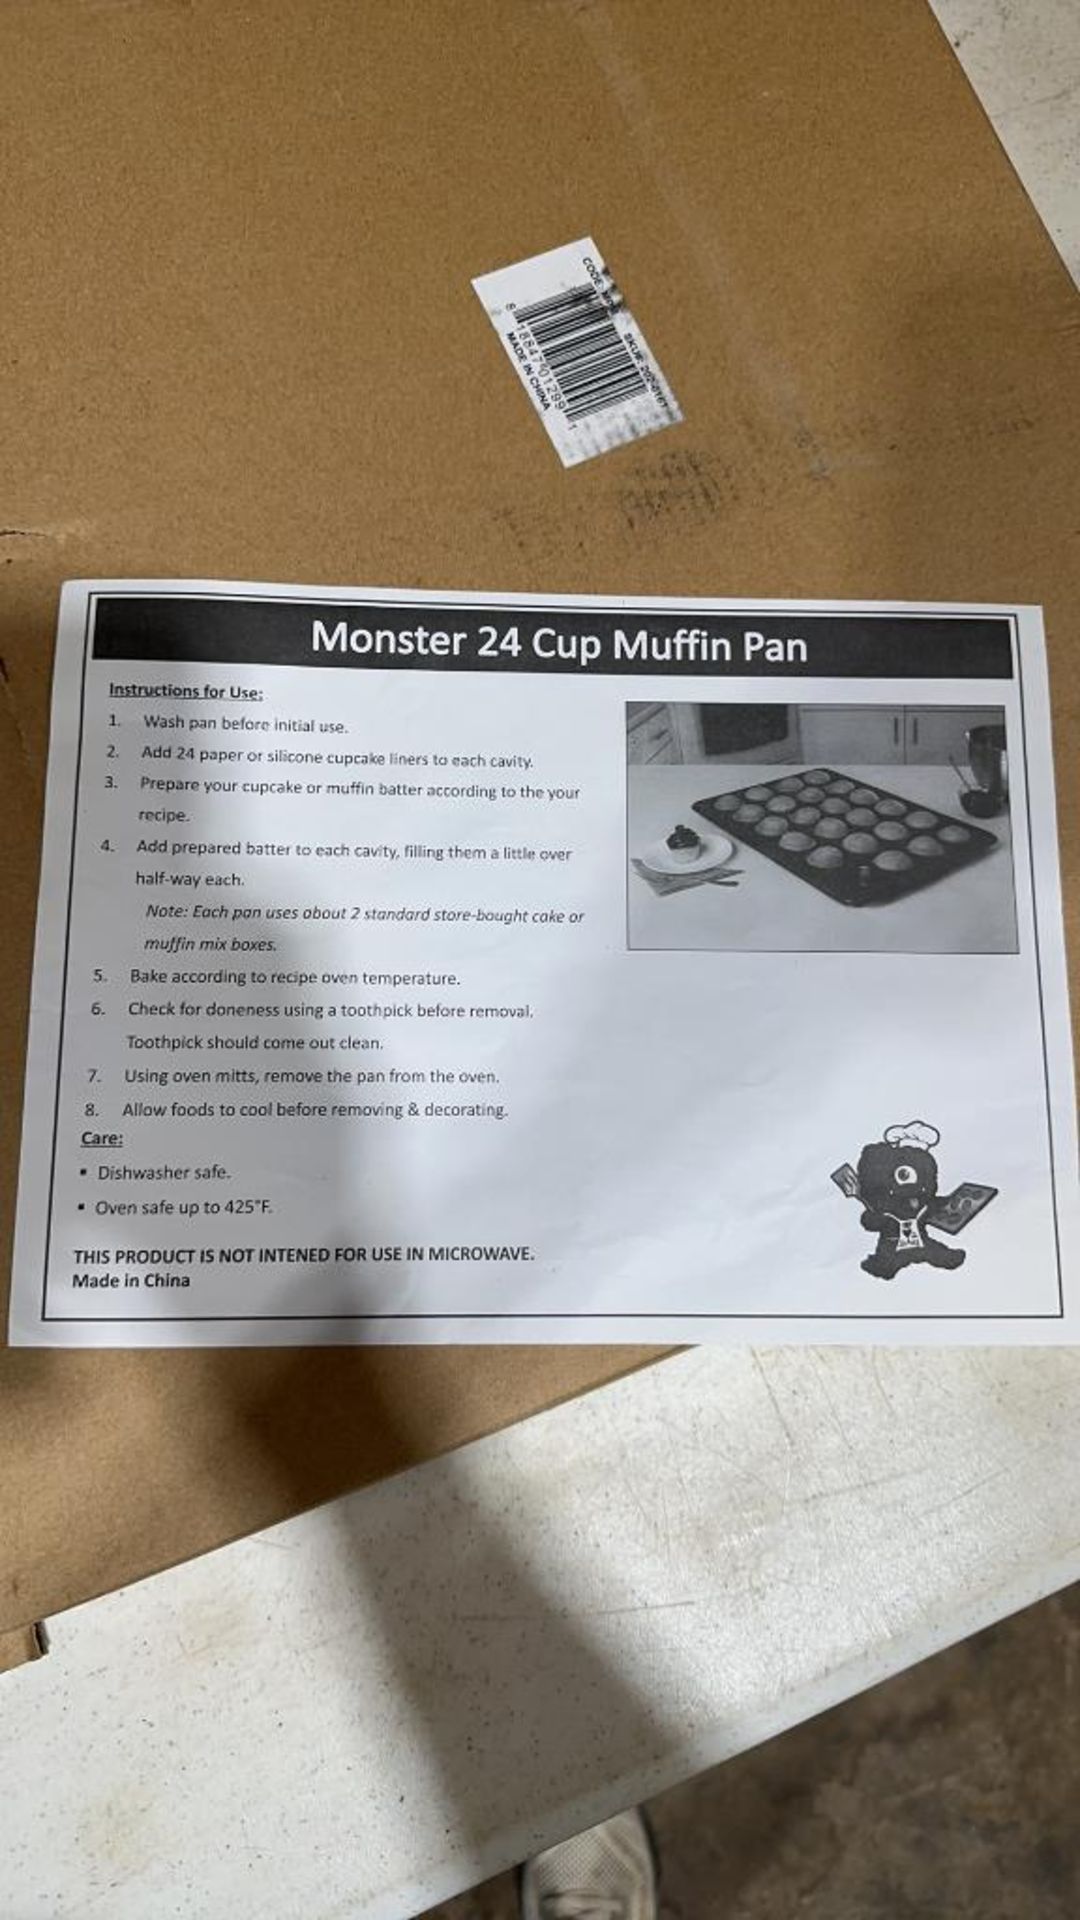 Monster 24 cup muffin pan - Image 3 of 3